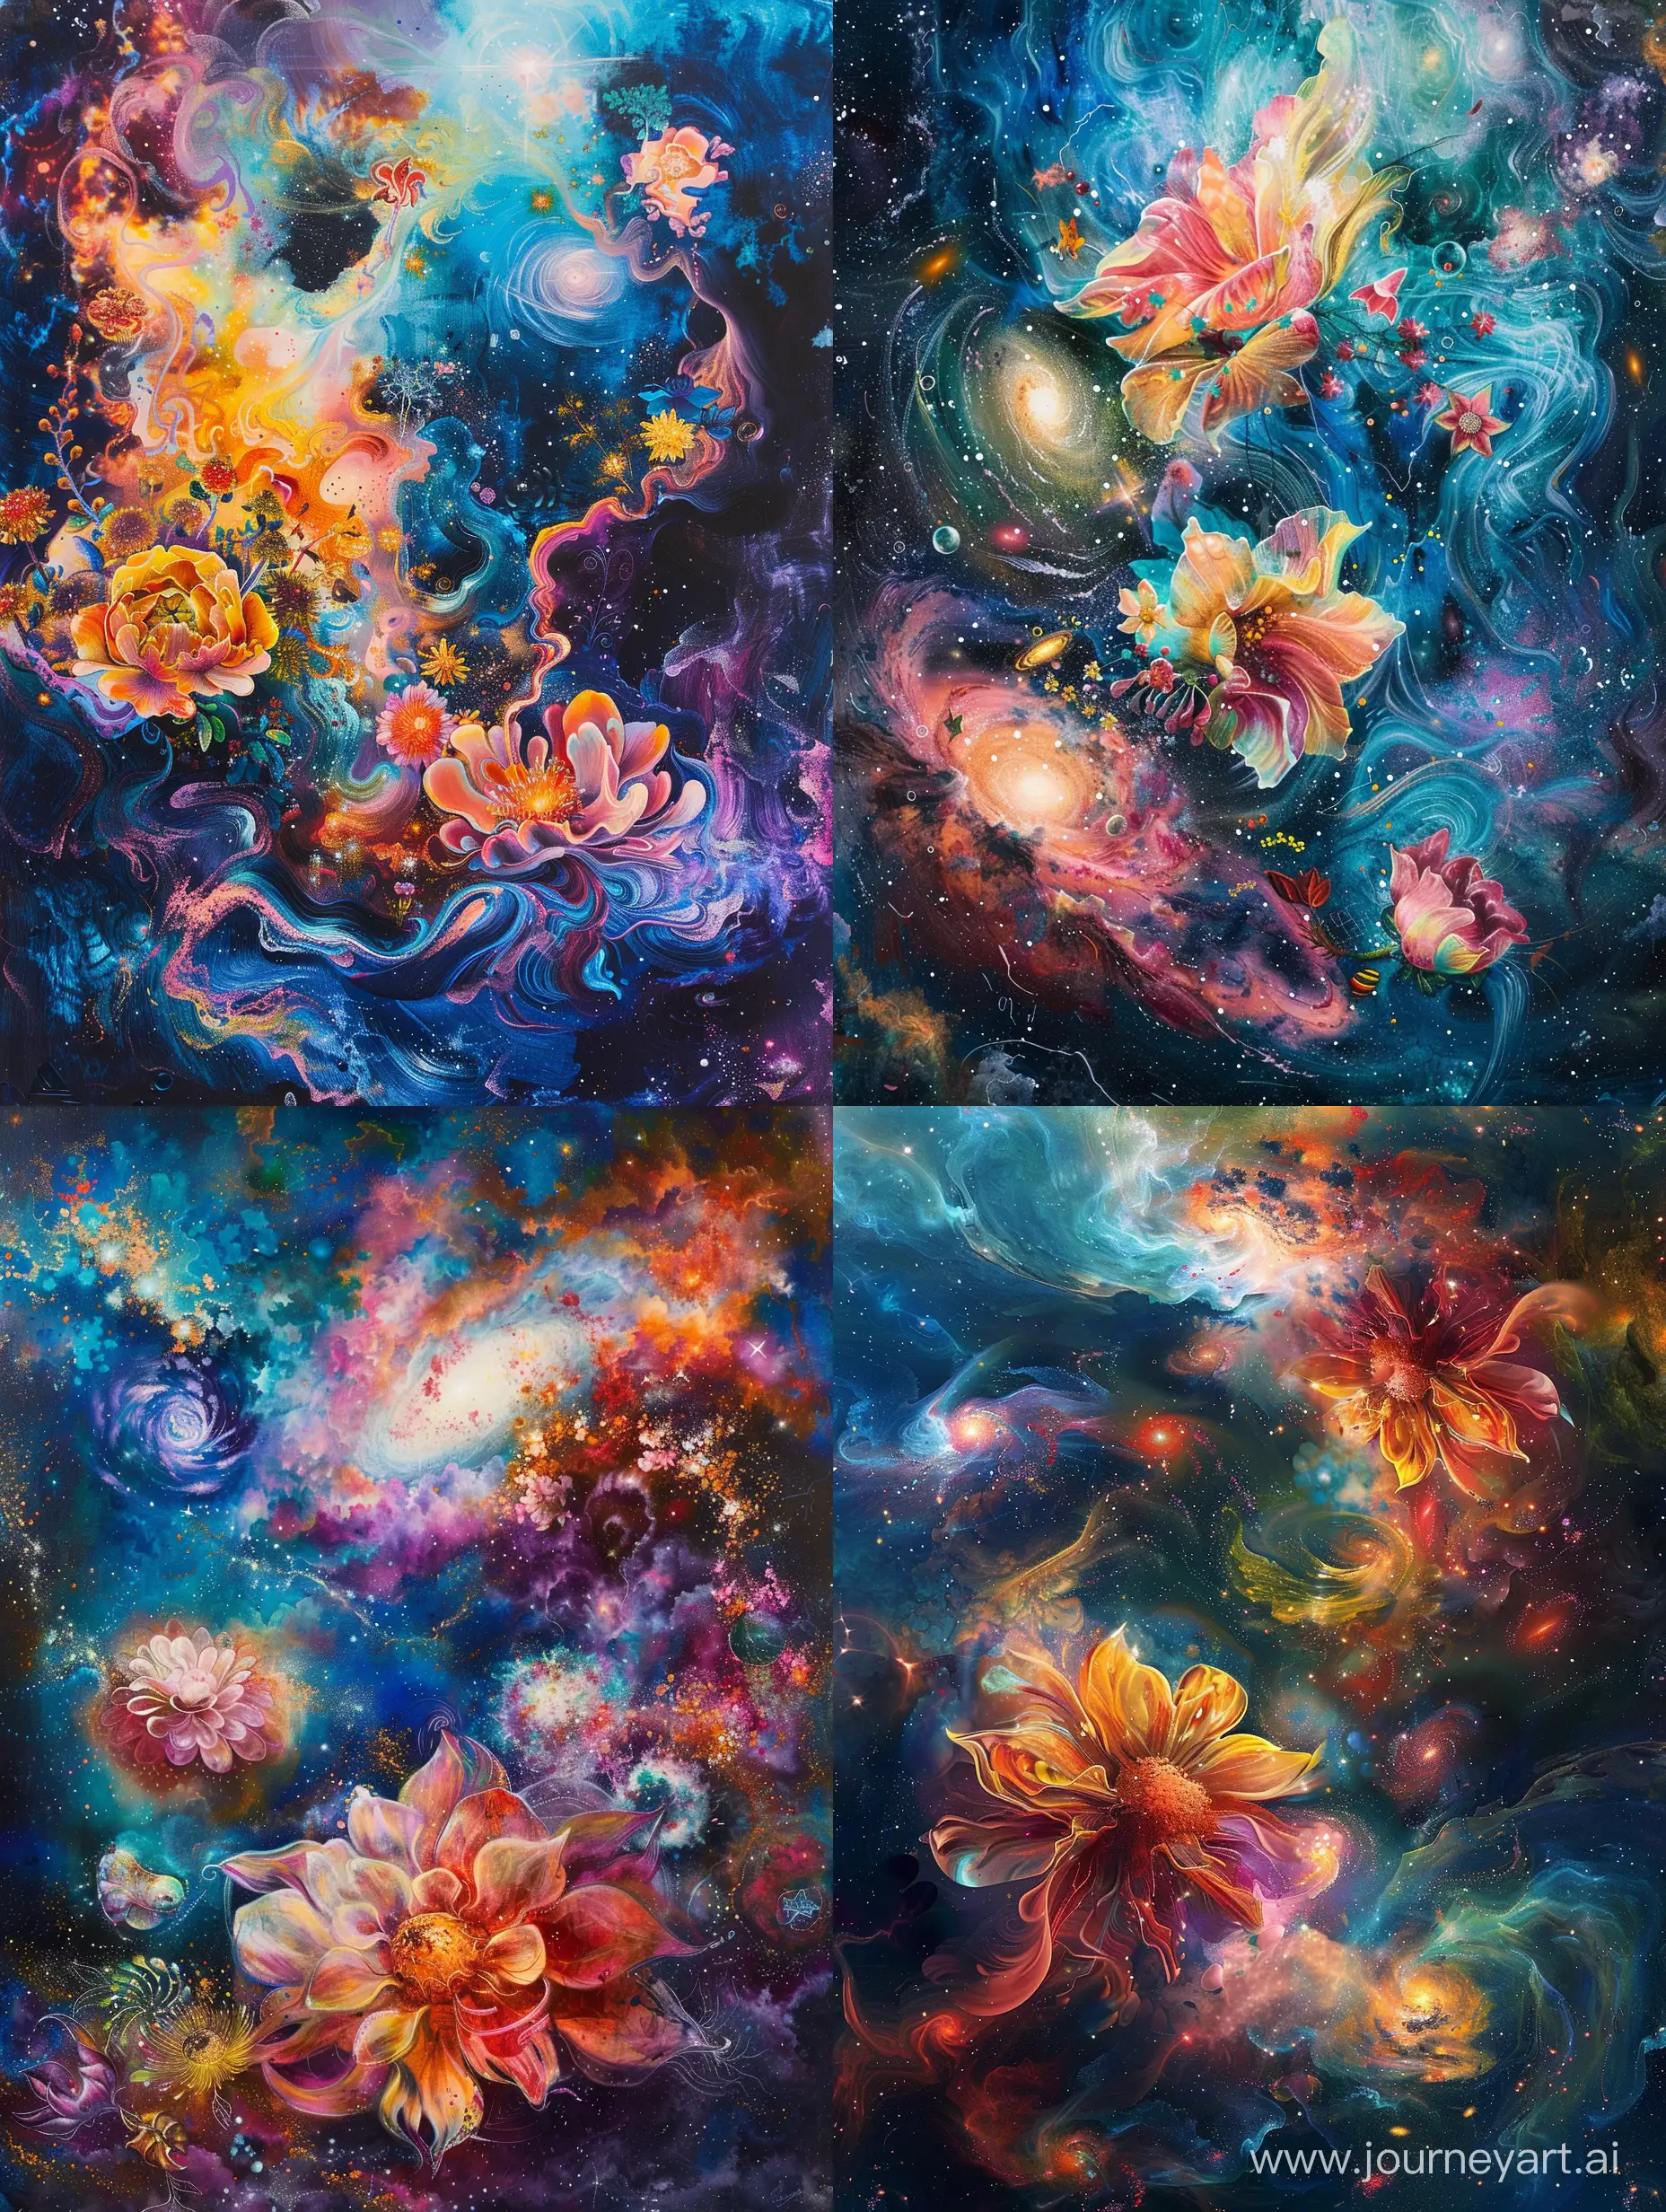 Celestial-Flowers-Blooming-in-Abstract-Cosmos-Vibrant-Ethereal-Art